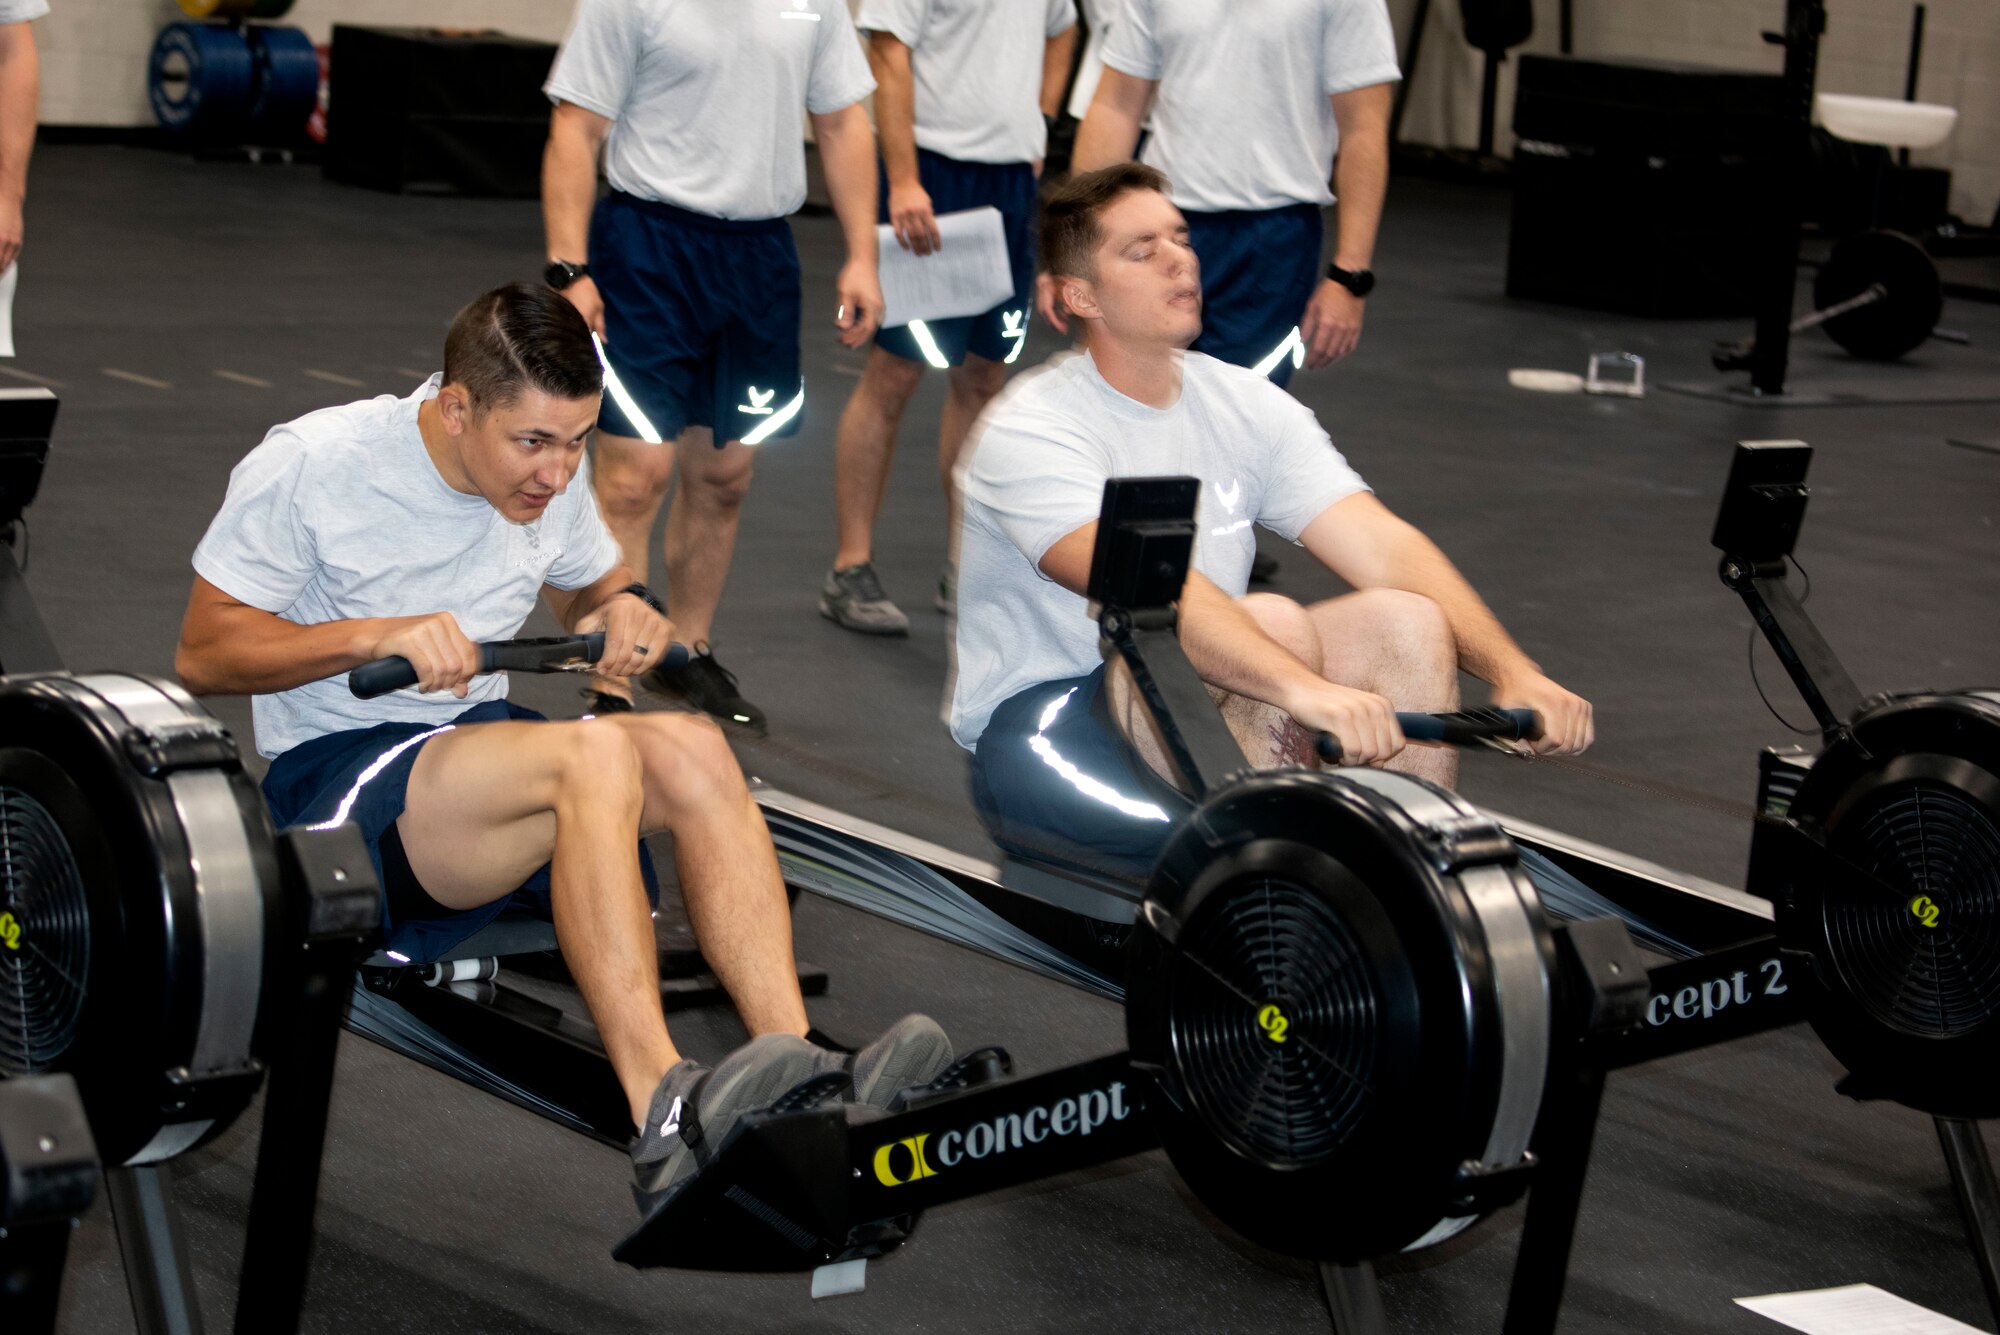 U.S. Air Force Tech. Sgt. Criss Draft, left, and Senior Airman Zachary Stringer, 20th Civil Engineer Squadron, Explosive Ordnance Disposal (EOD) flight technicians, row 1,000 meters during the beta test of the EOD Tier 2 practice fitness test at Shaw Air Force Base, South Carolina, Oct. 4, 2019.